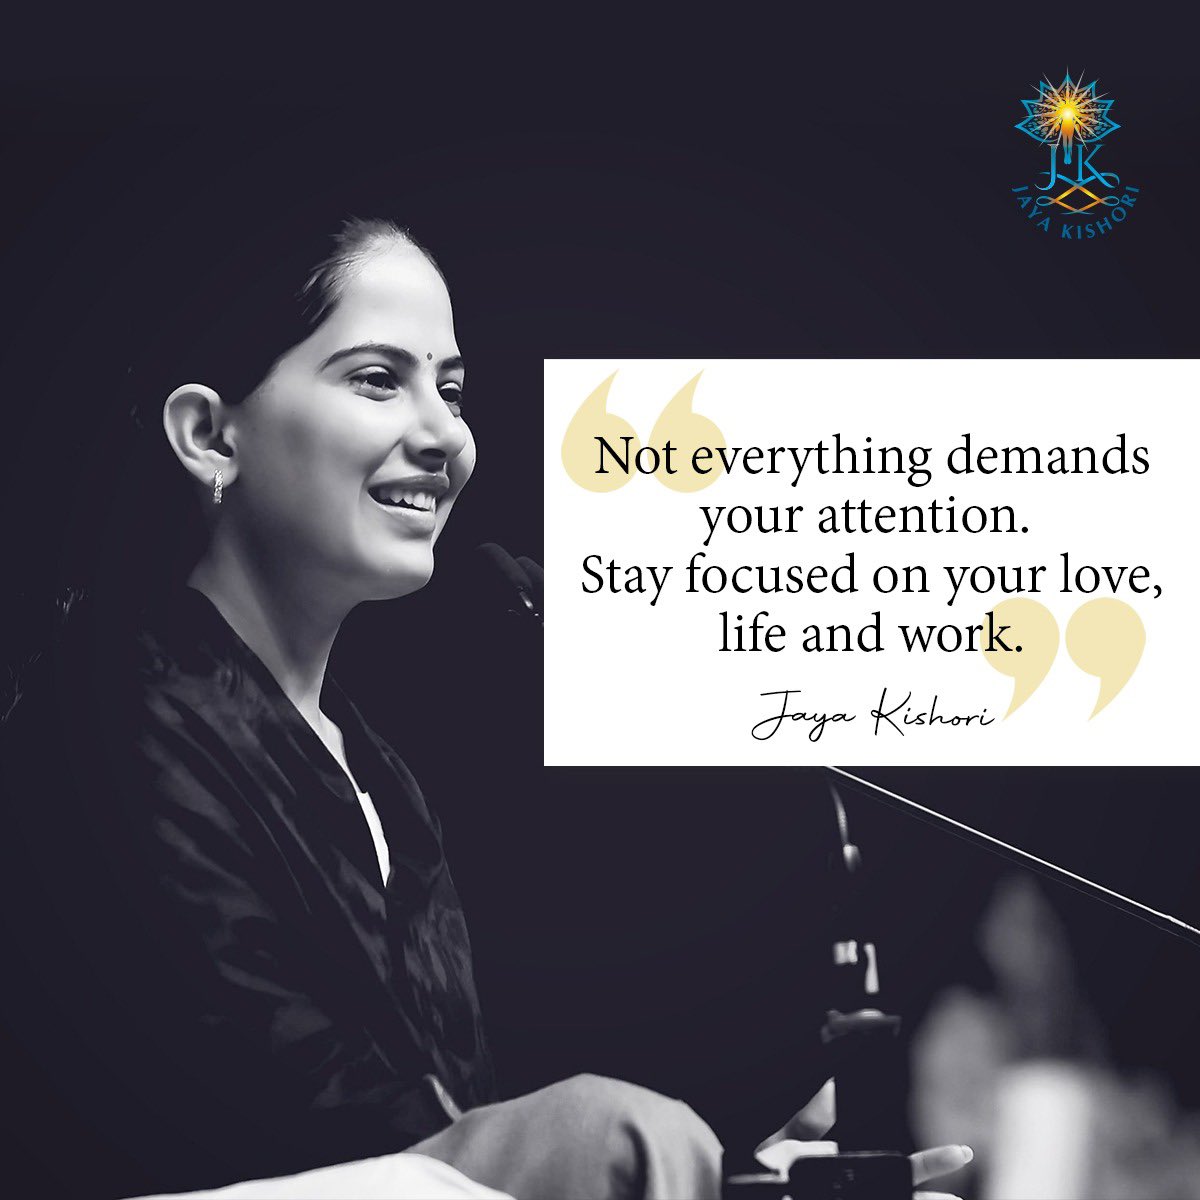 Not everything demands your attention. Stay focused on your love, life and work. #jayakishori #jayakishorimotivation #motivationalquotes #dailymotivation #spirituality